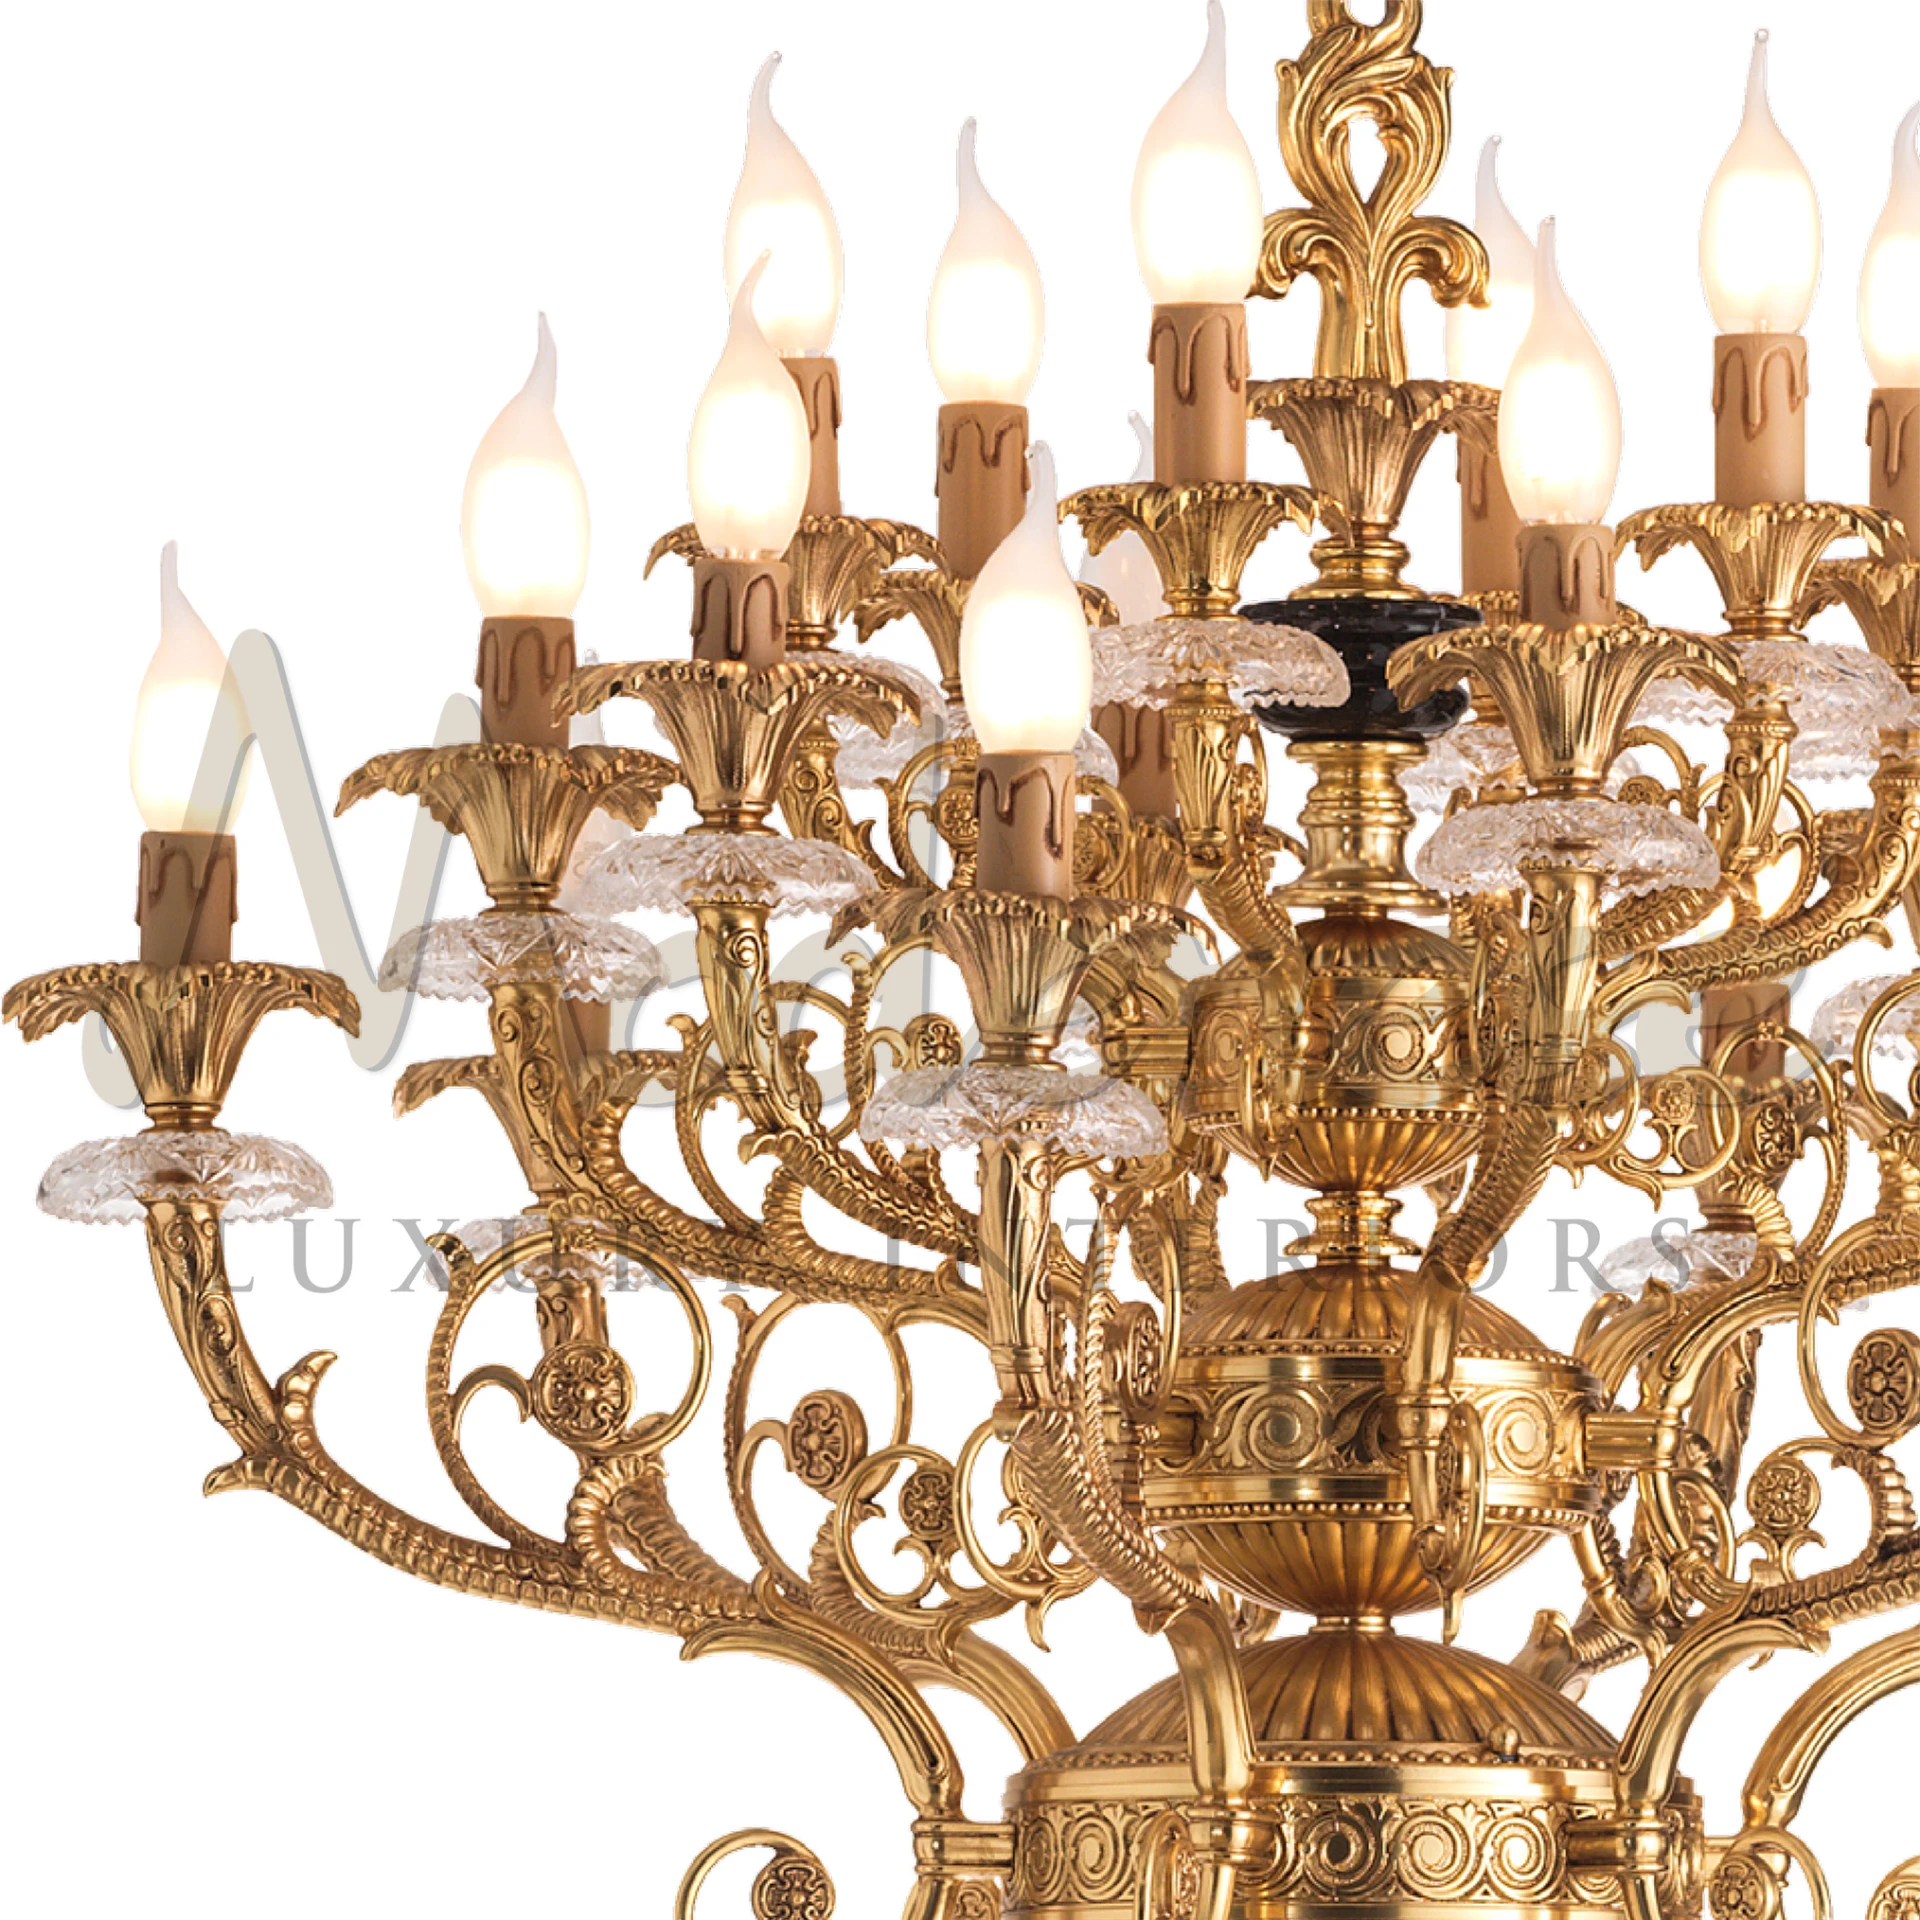 A close look at a fancy gold chandelier with crystal decorations and bulbs